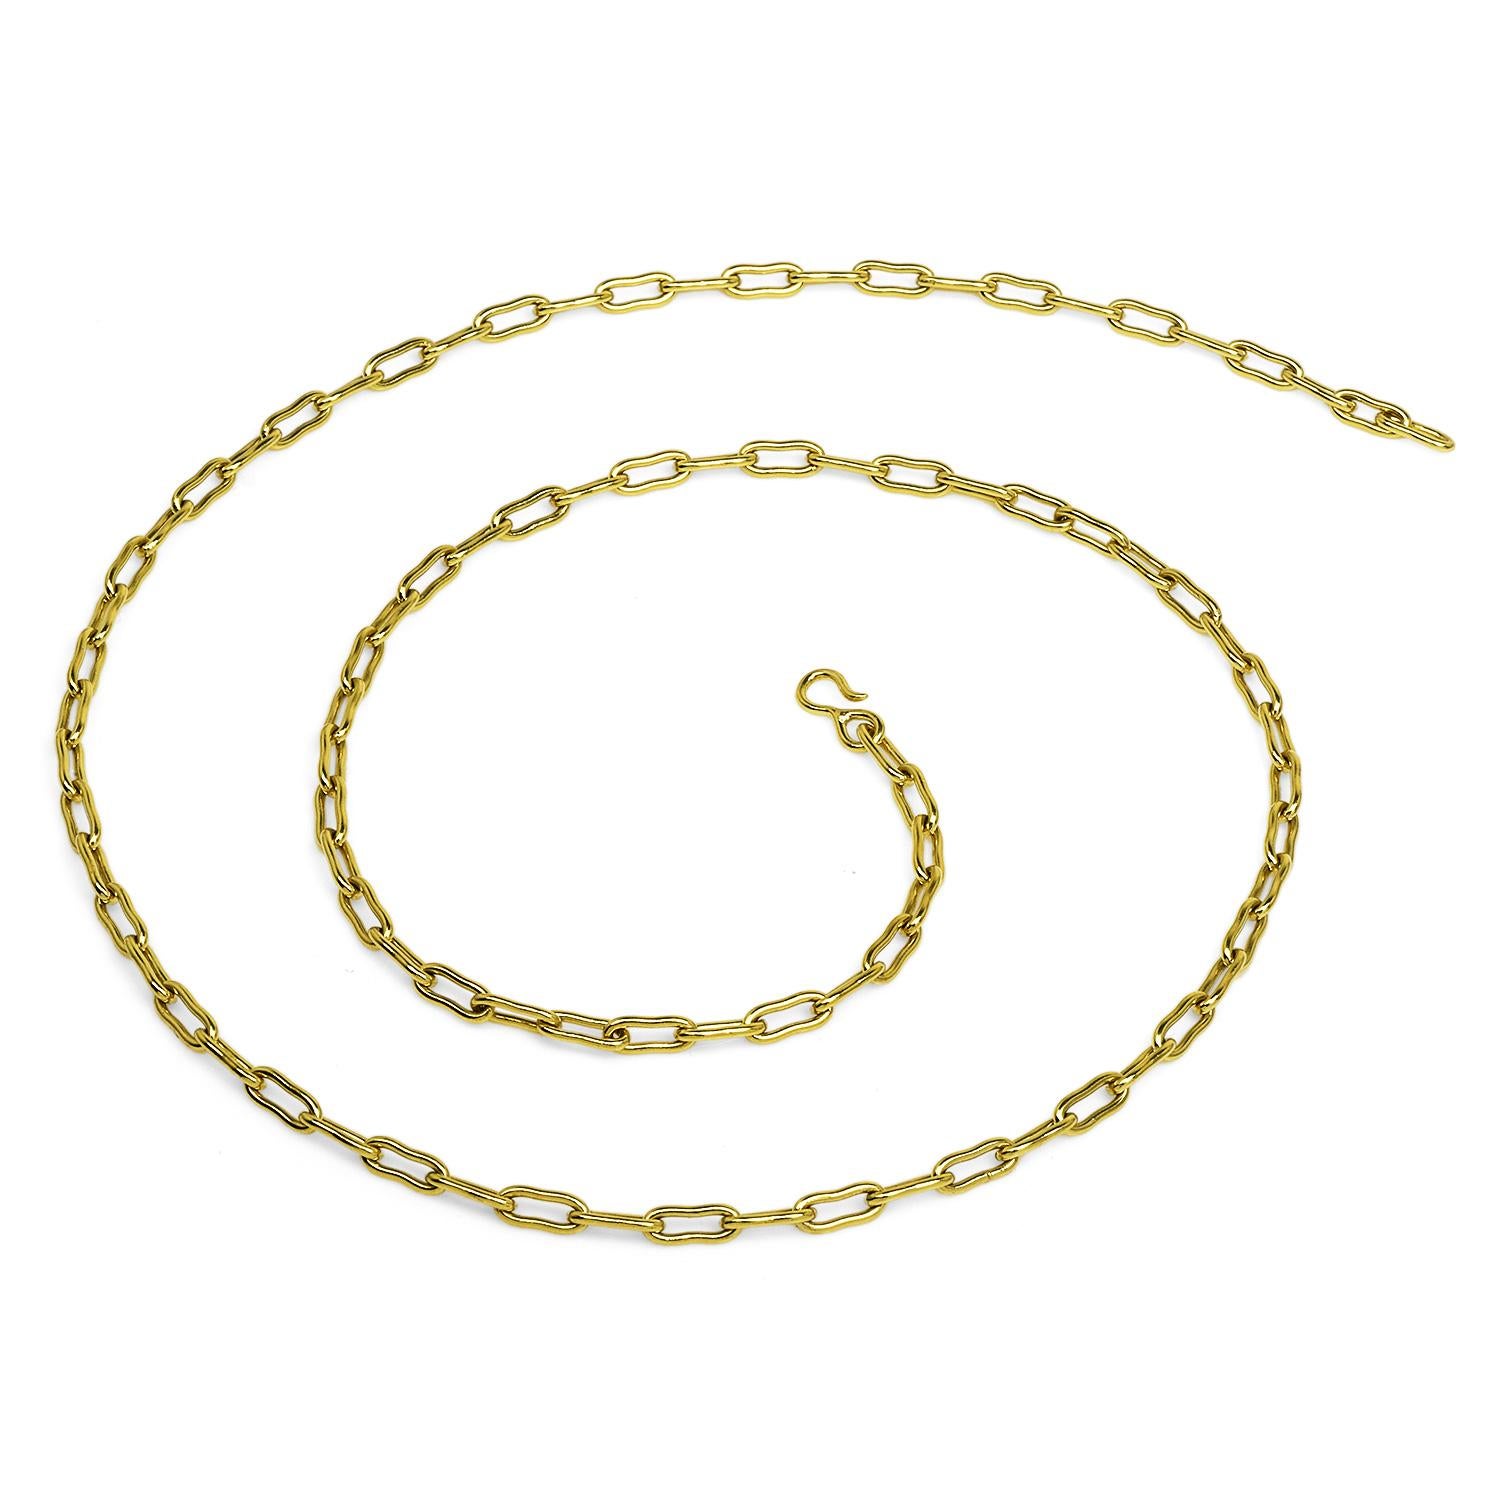 Modern Vintage Chic Retro 18K Yellow Gold Link Chain Necklace